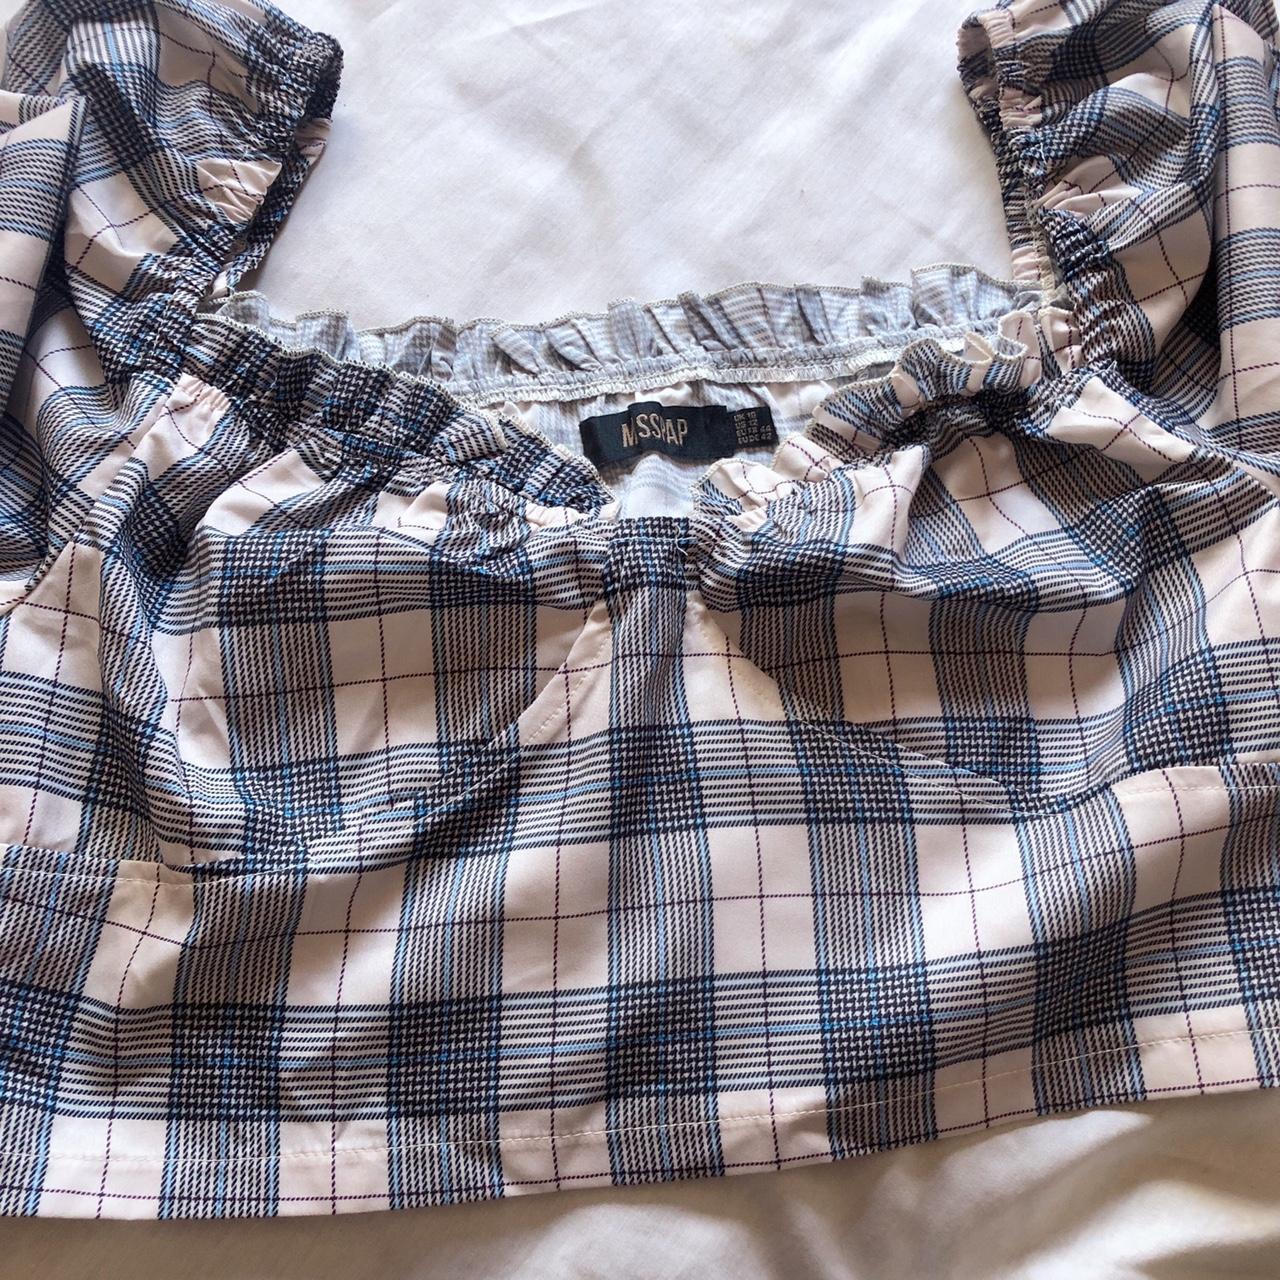 Product Image 3 - miss pap plaid crop top

lightweight